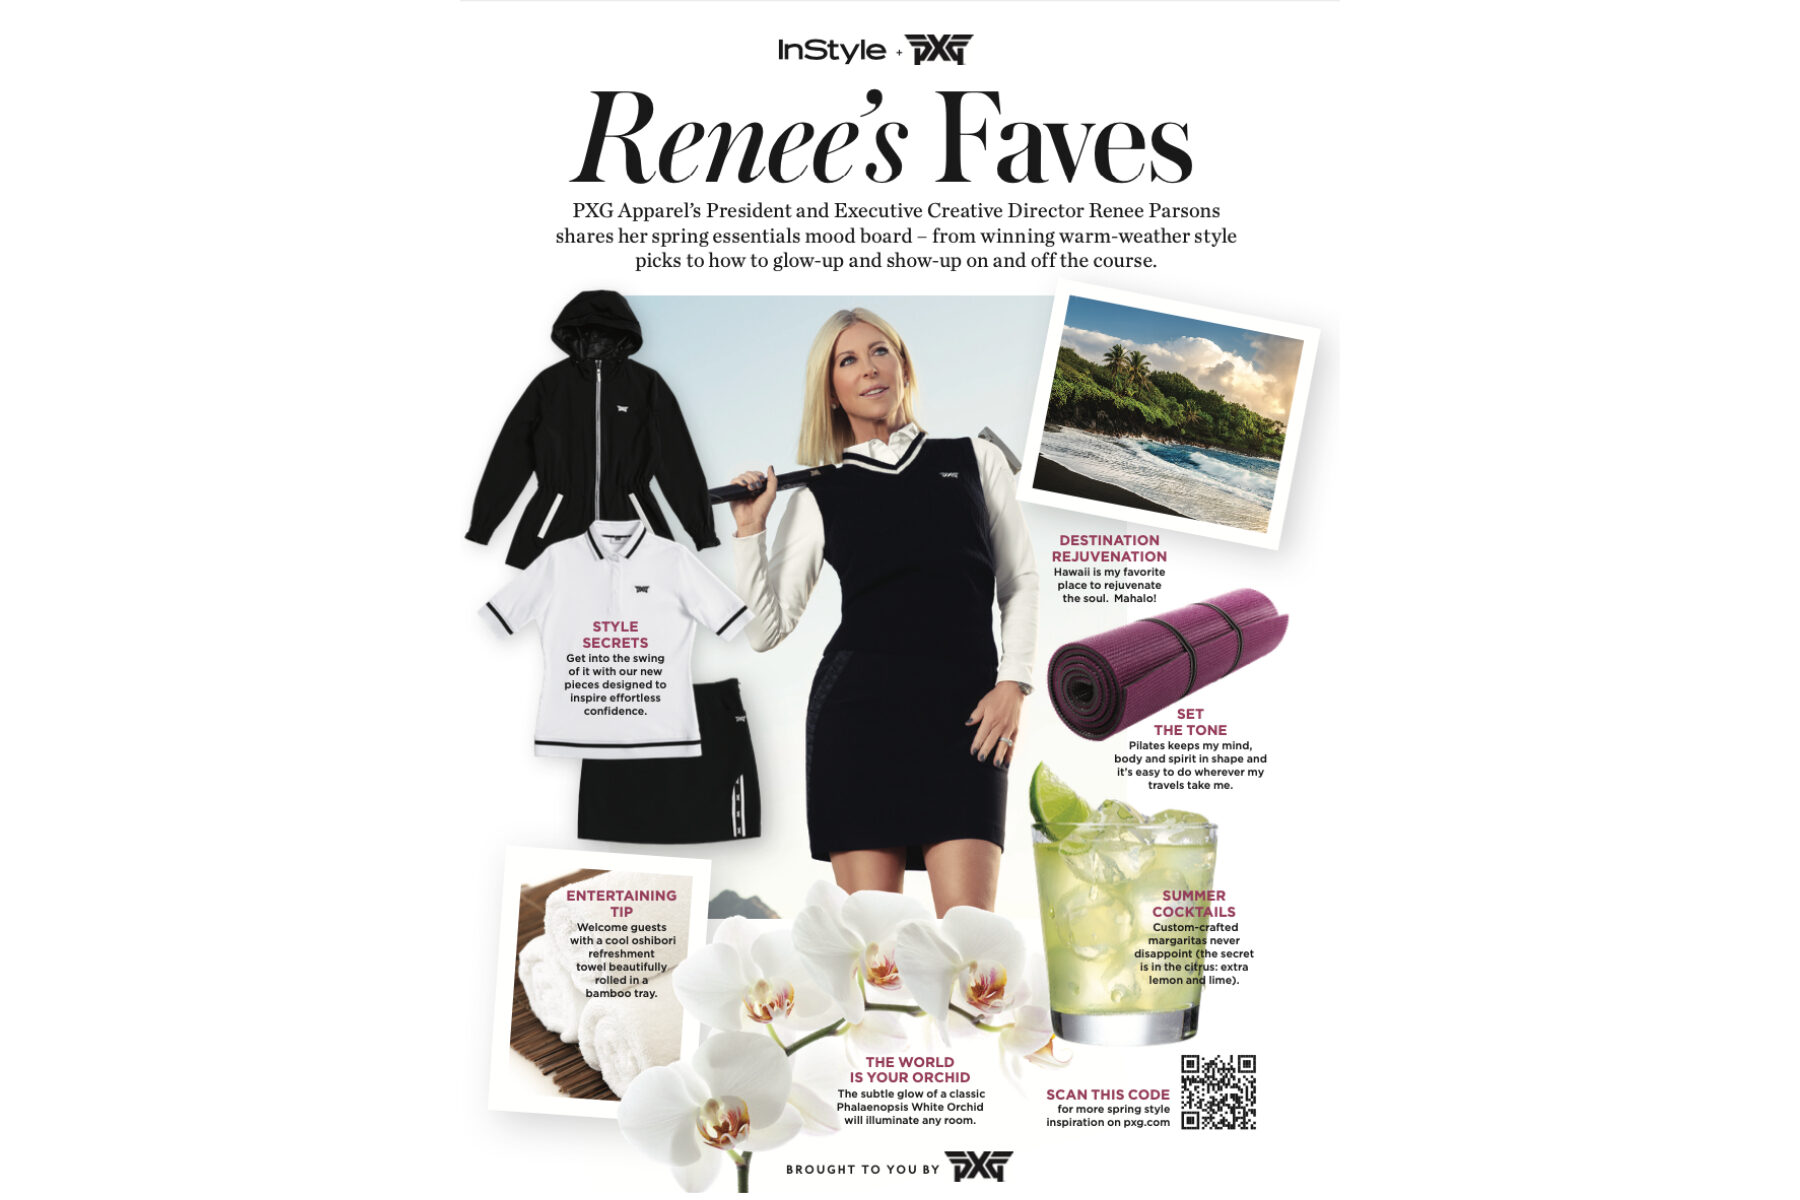 InStyle Renee;s Faves magazine article